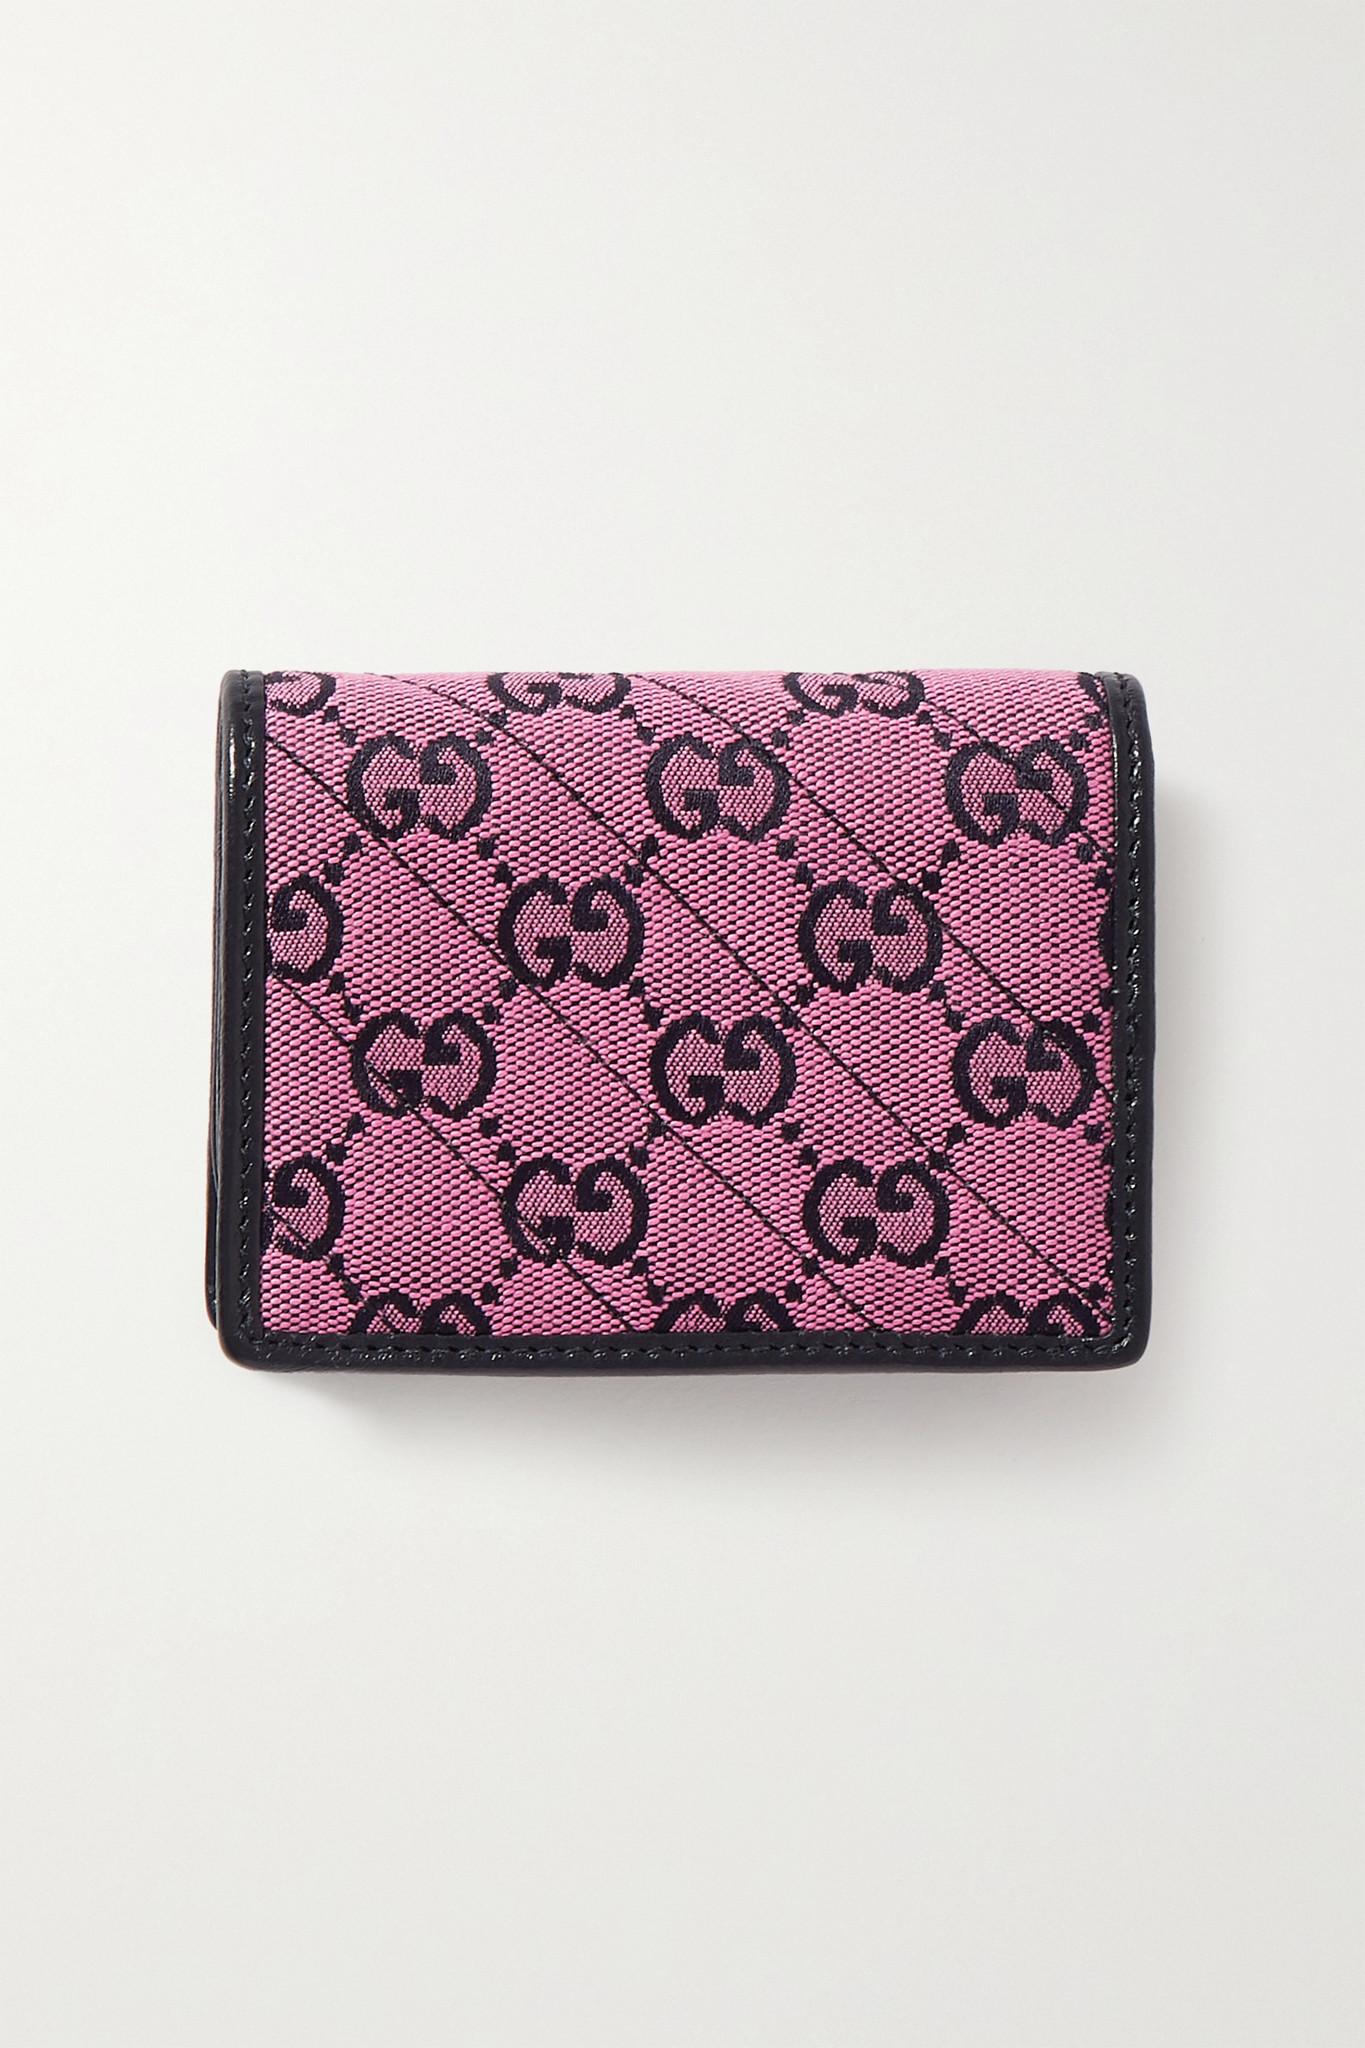 GUCCI Marmont GG Matelasse Leather Zip Around Wallet Pink - 15% OFF